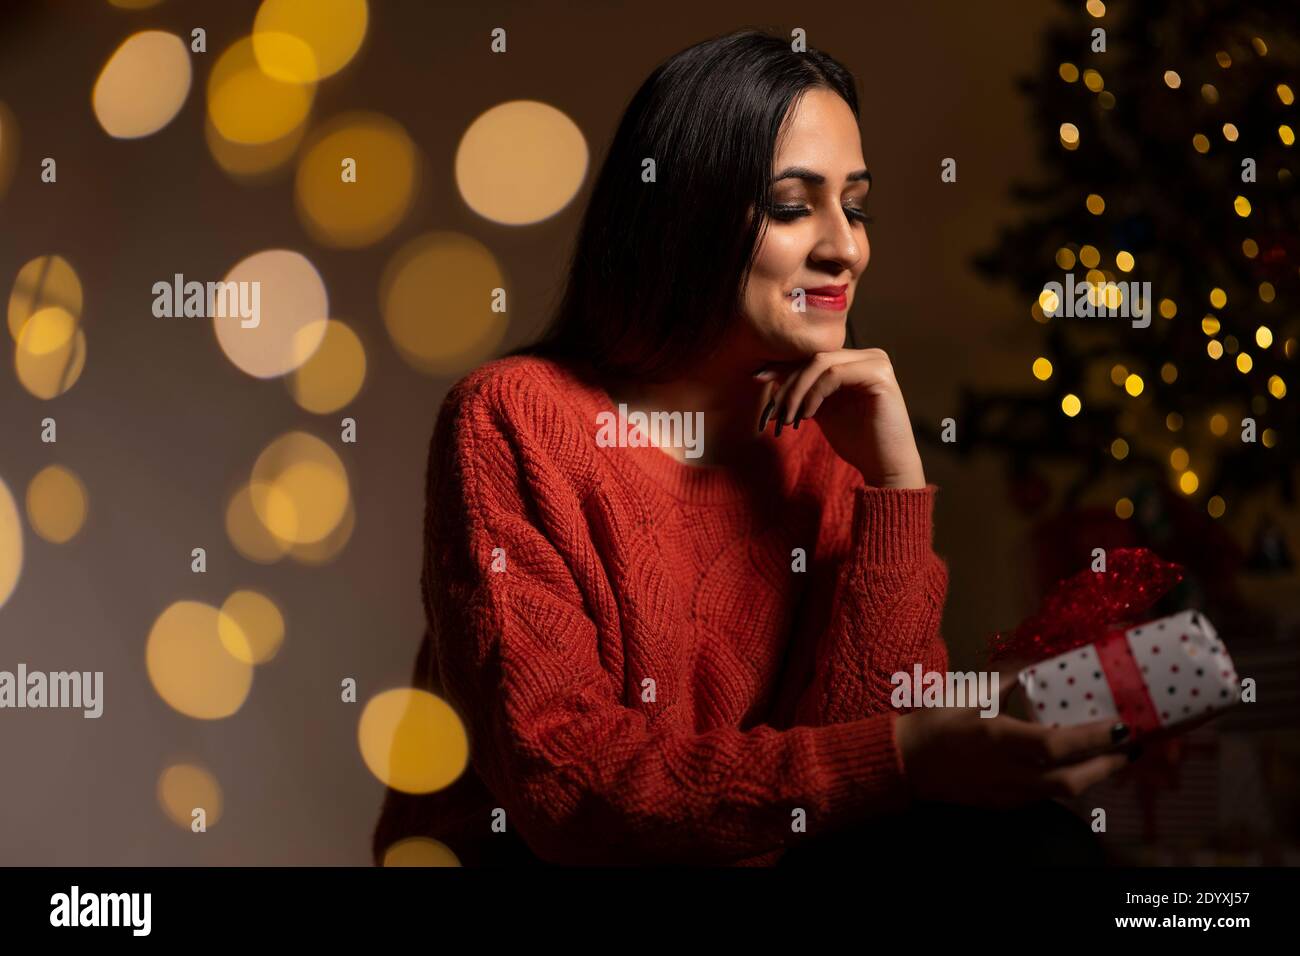 Young smiling woman in sweater holding a gift box celebrating winter holidays Stock Photo